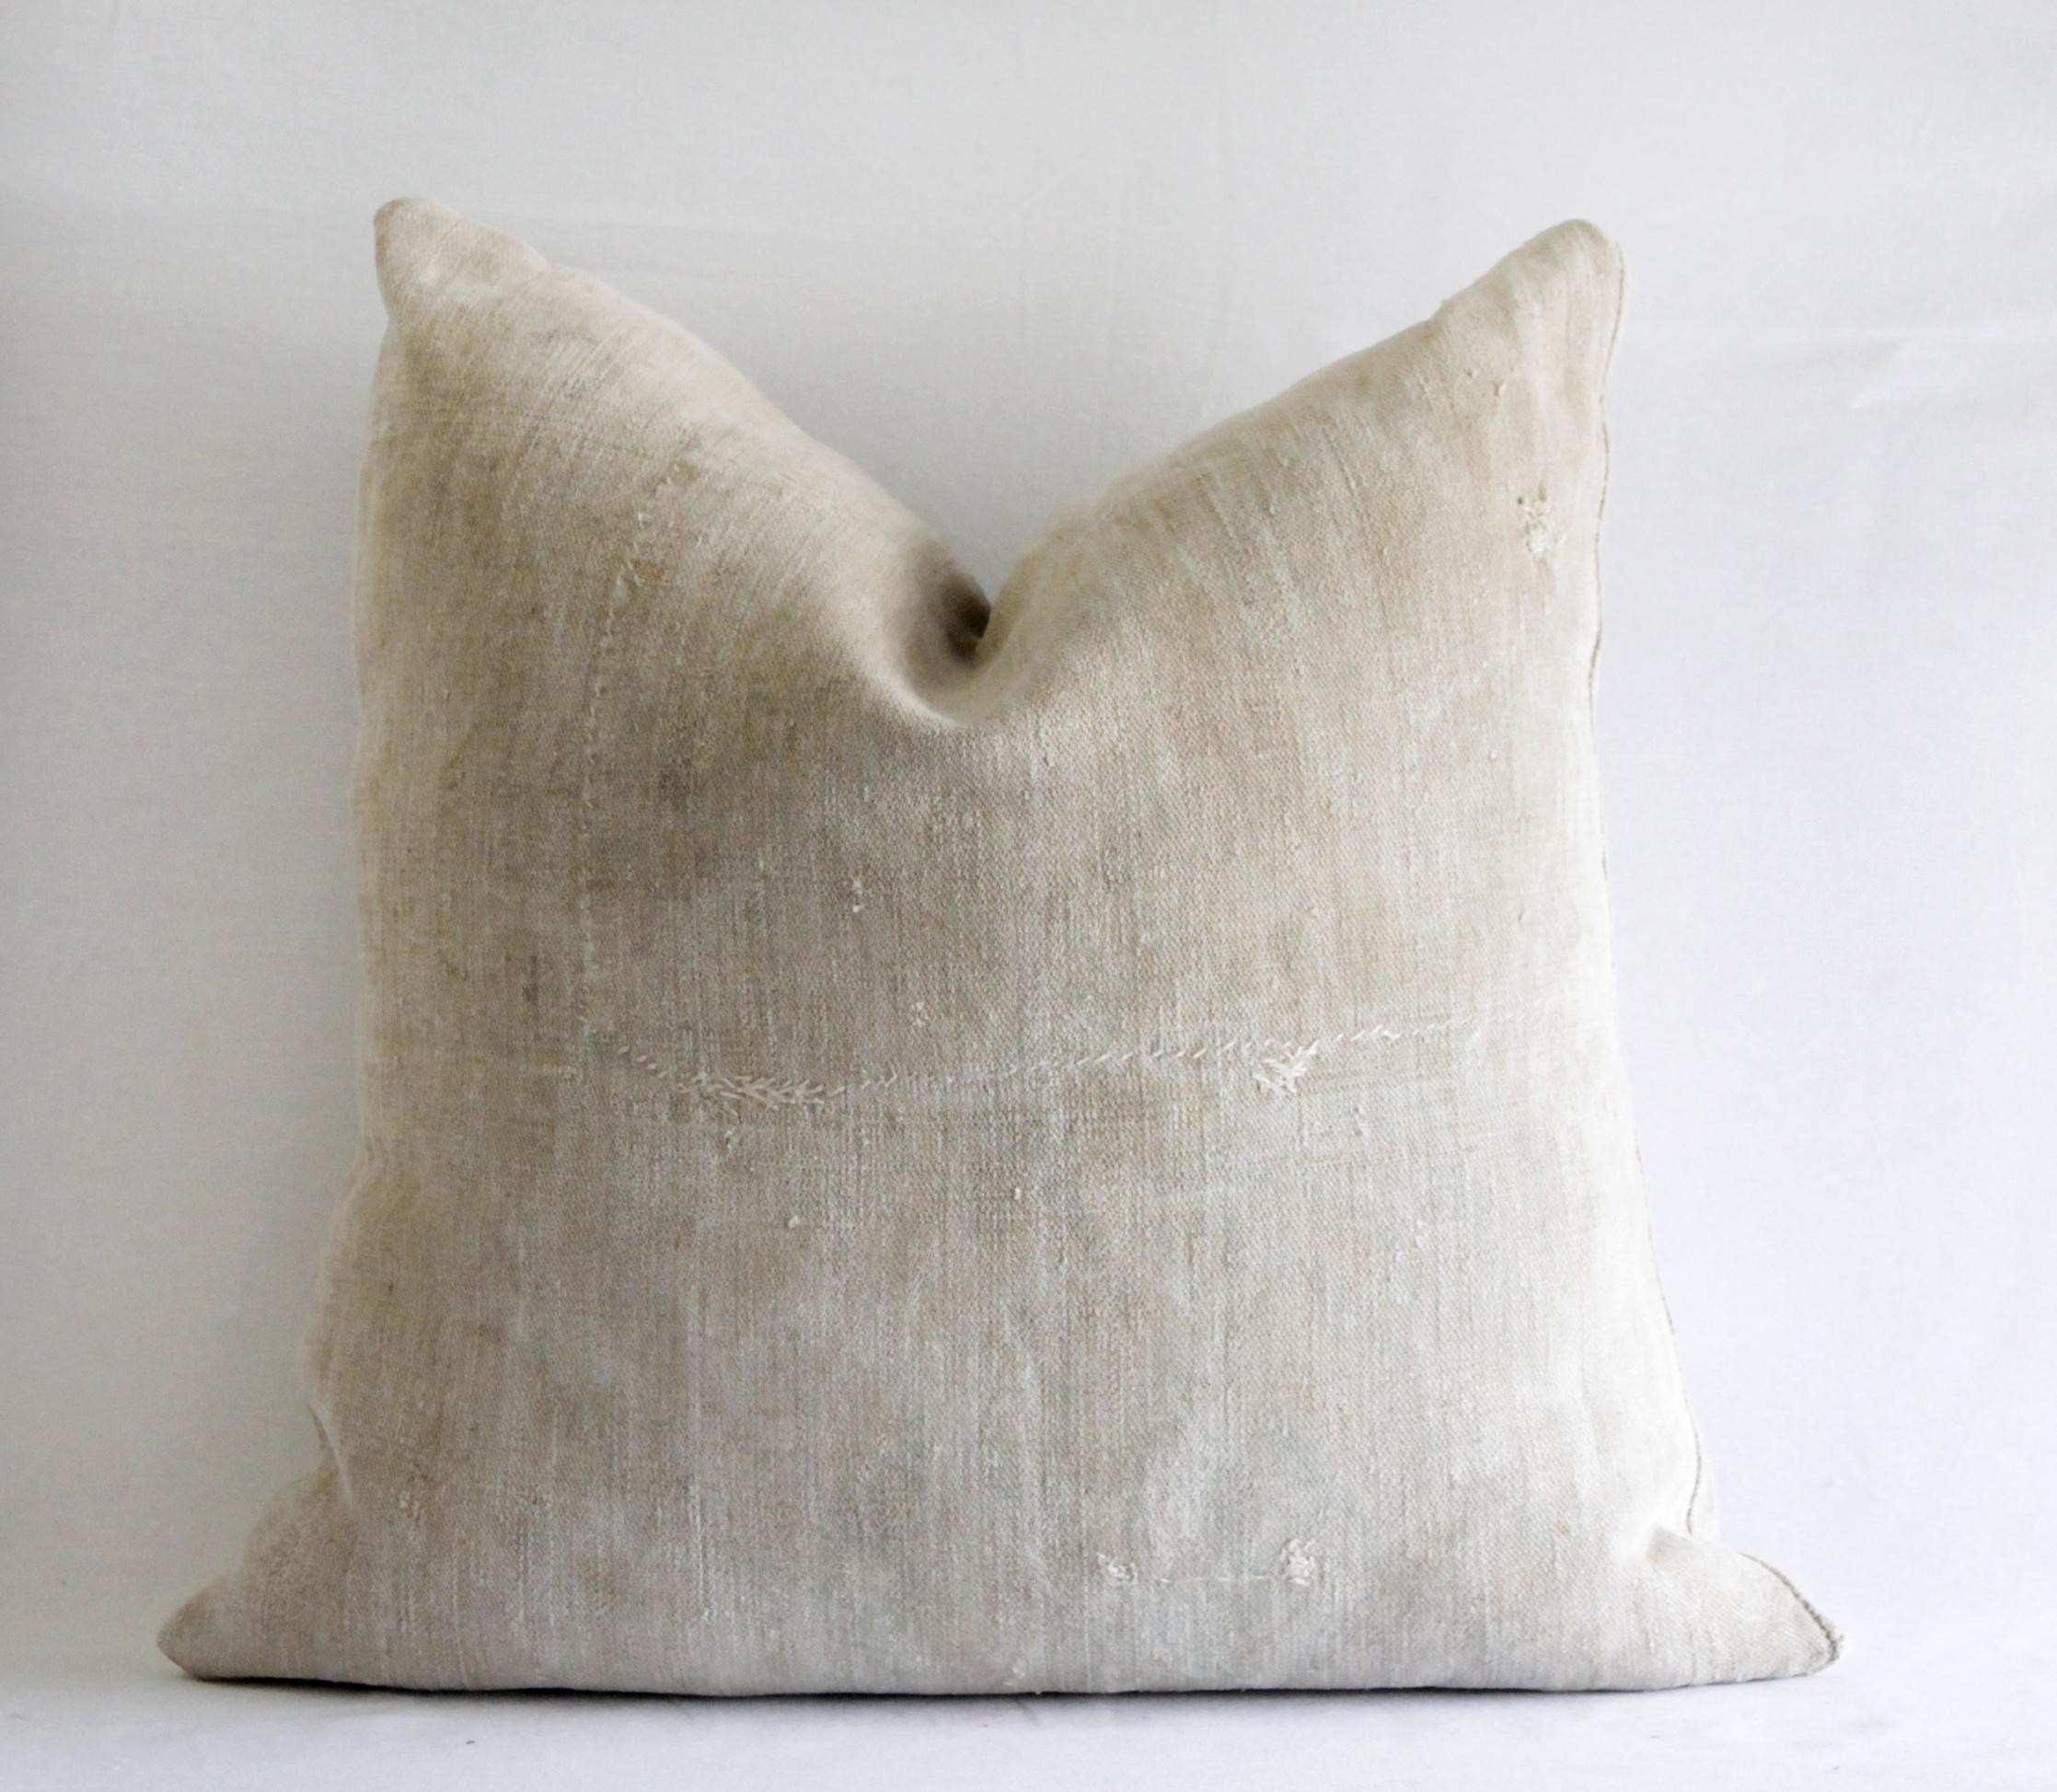 Antique grain sack pillow with original stamp writing
Heavy thick European grain sack pillow with original stamp on the front, and zipper closure.
Darker flax natural color.
Measures: 20 x 21
Zipper closure, insert not included.